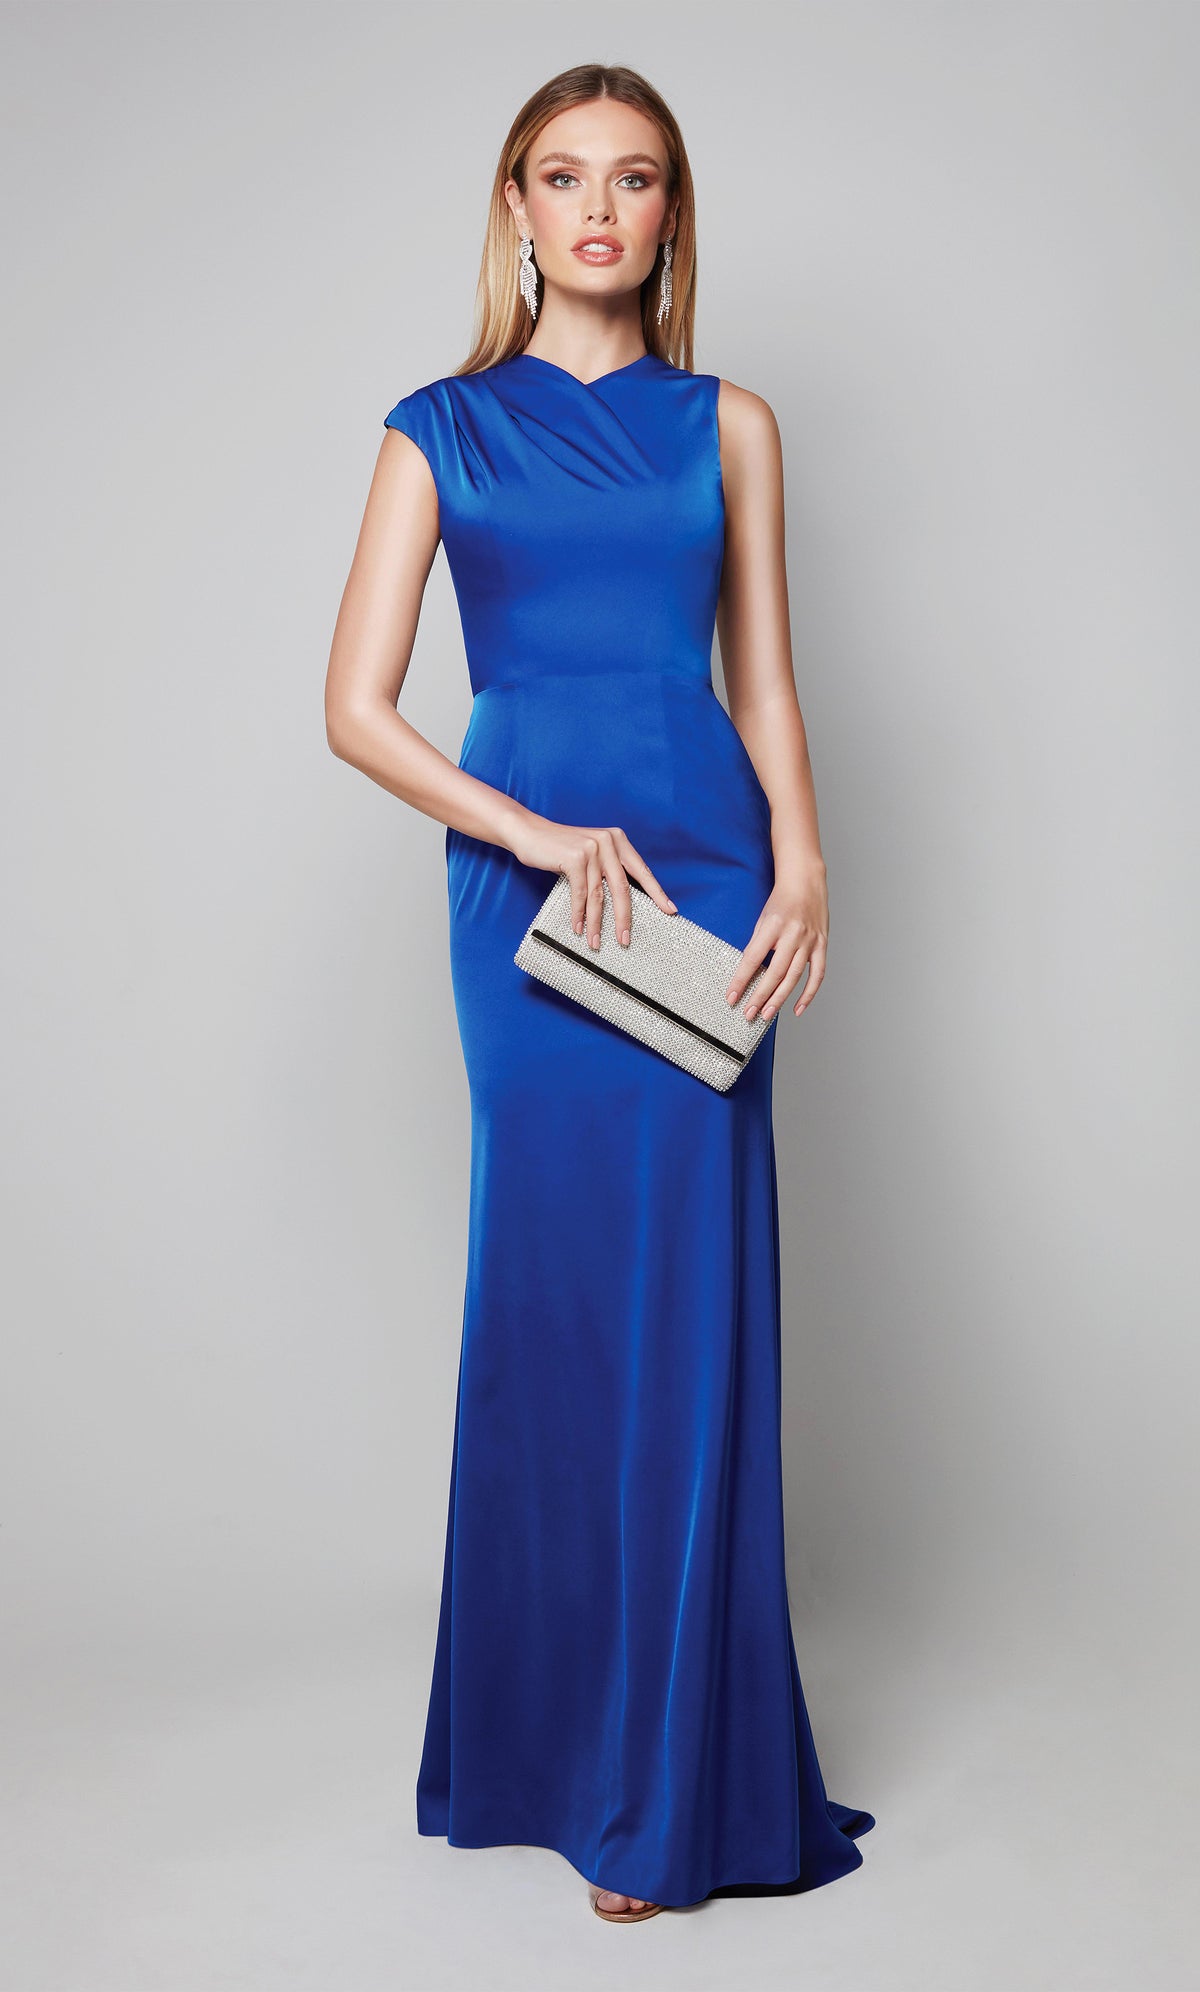 Simple mother of the bride dress with ruching detail on bodice in royal blue. Color-SWATCH_27598__ROYAL